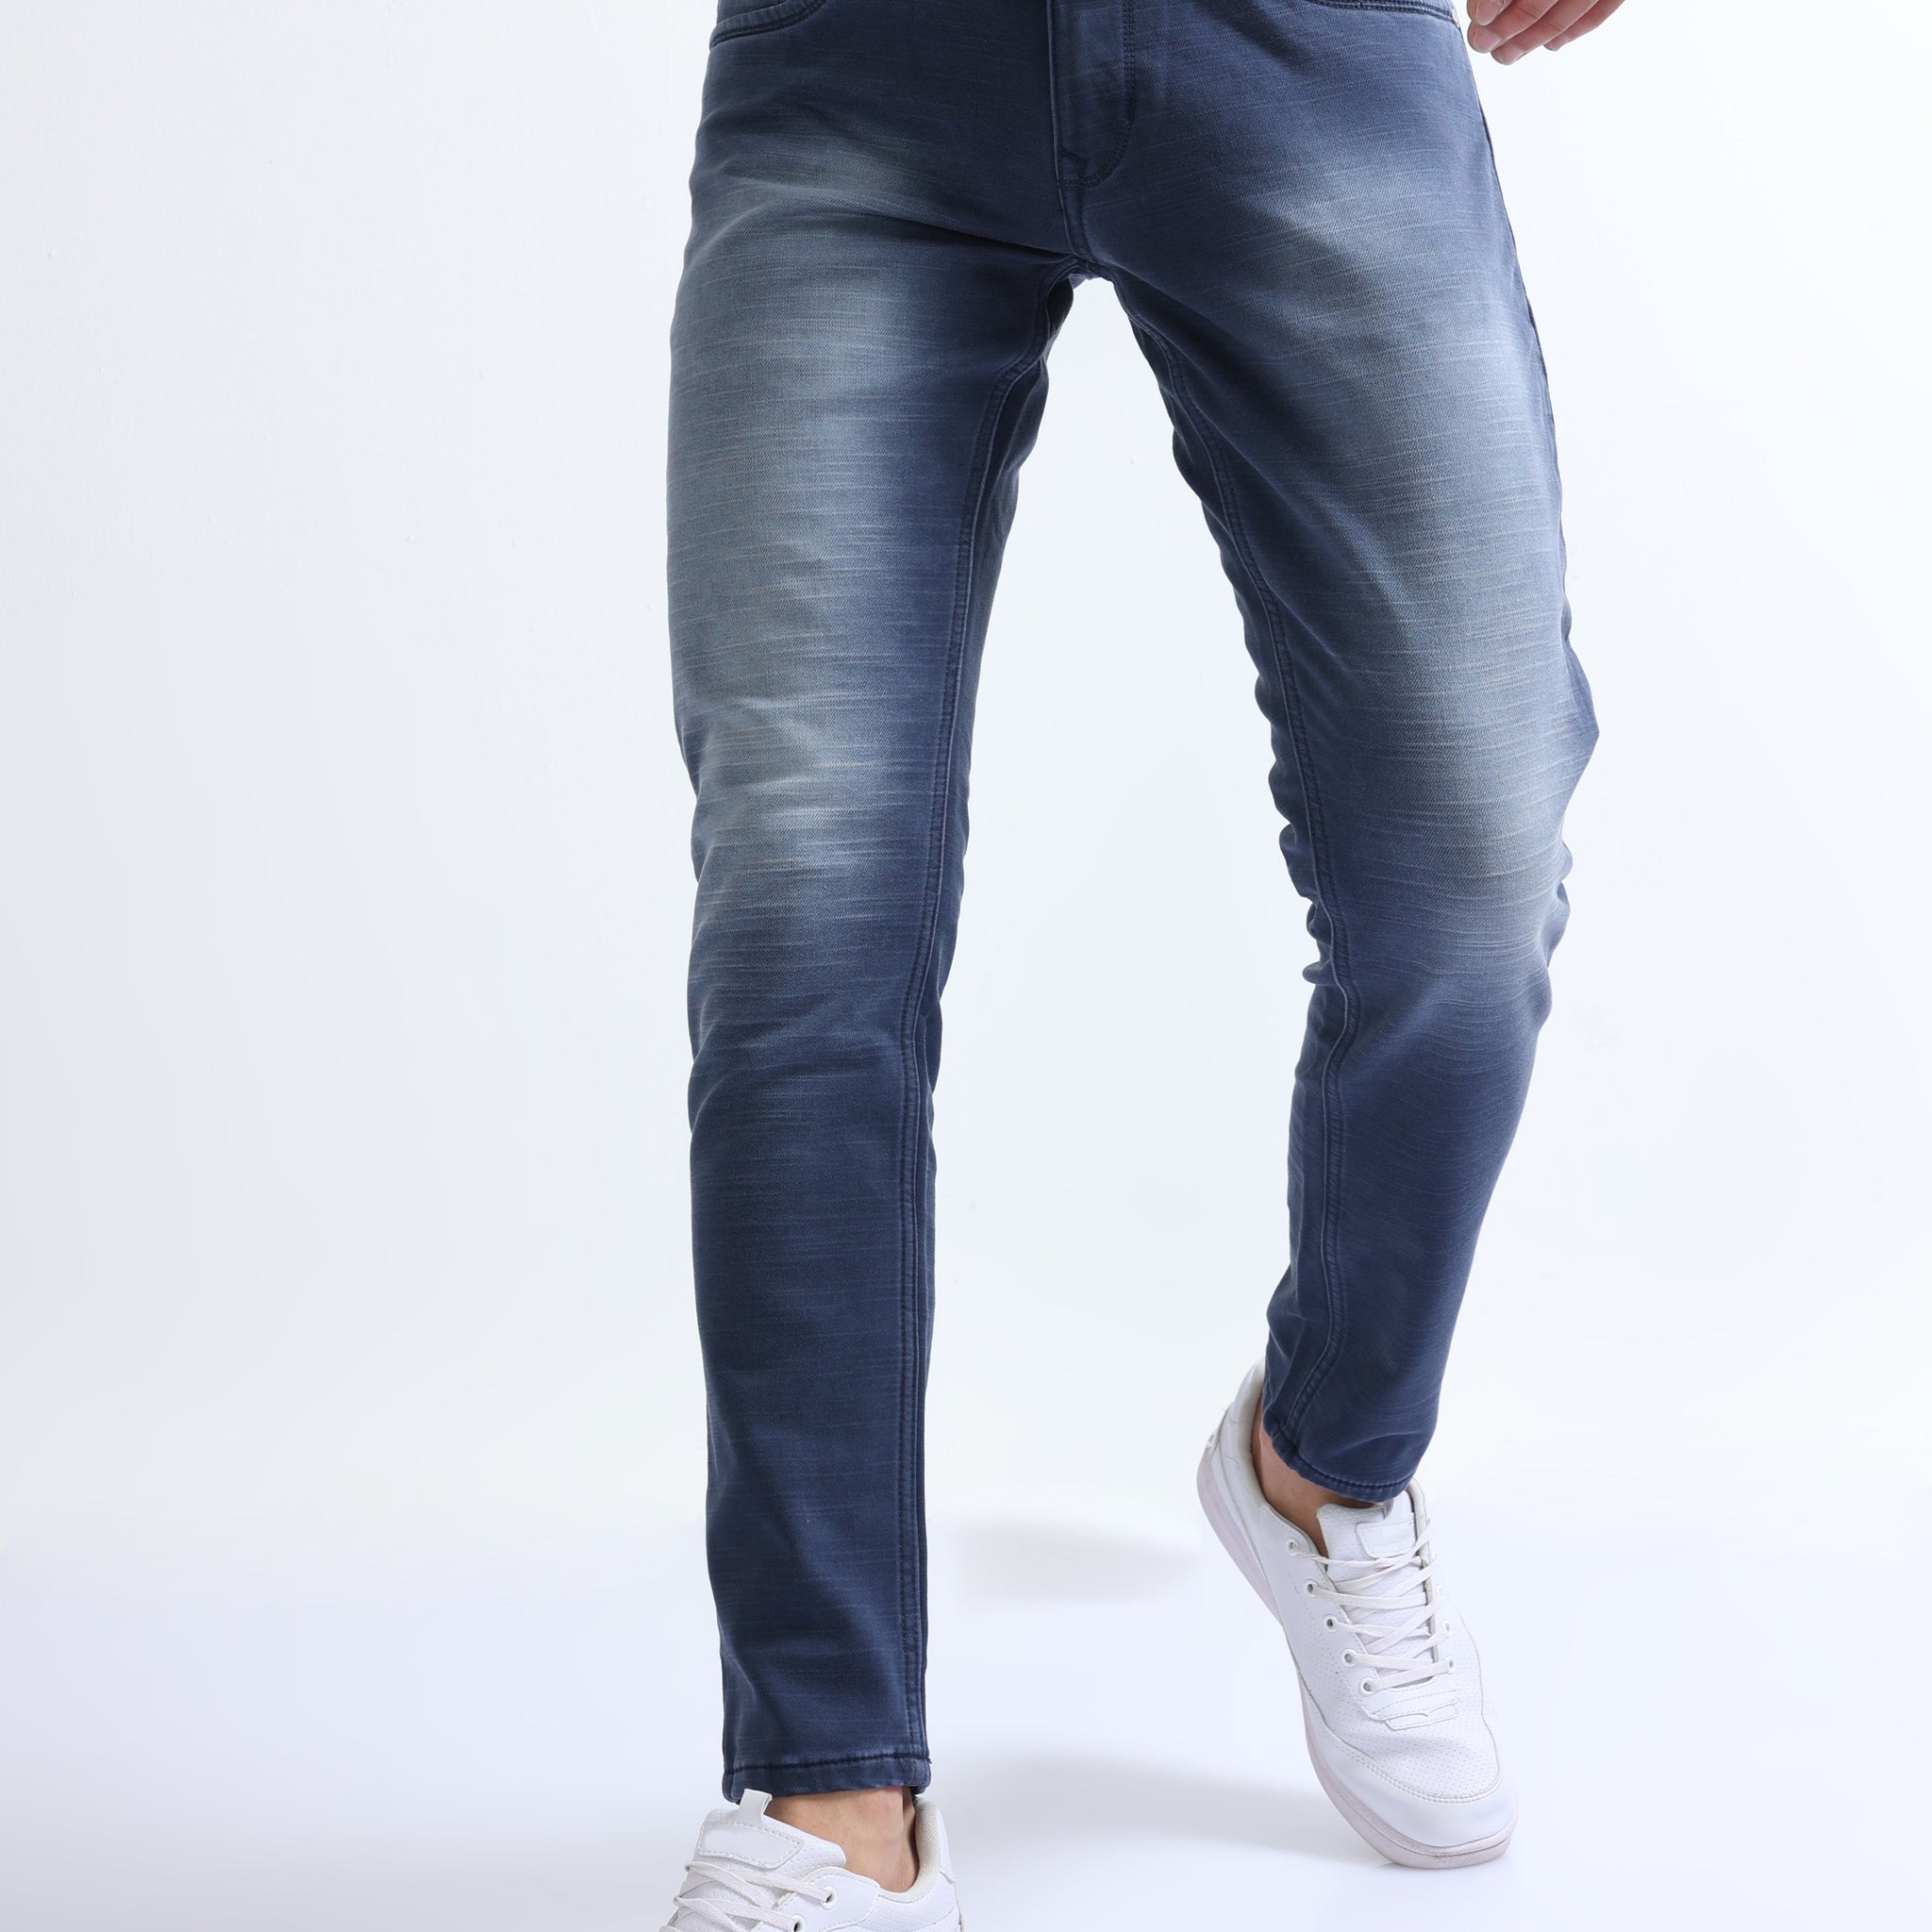 Buy Colored Textured Jean Online